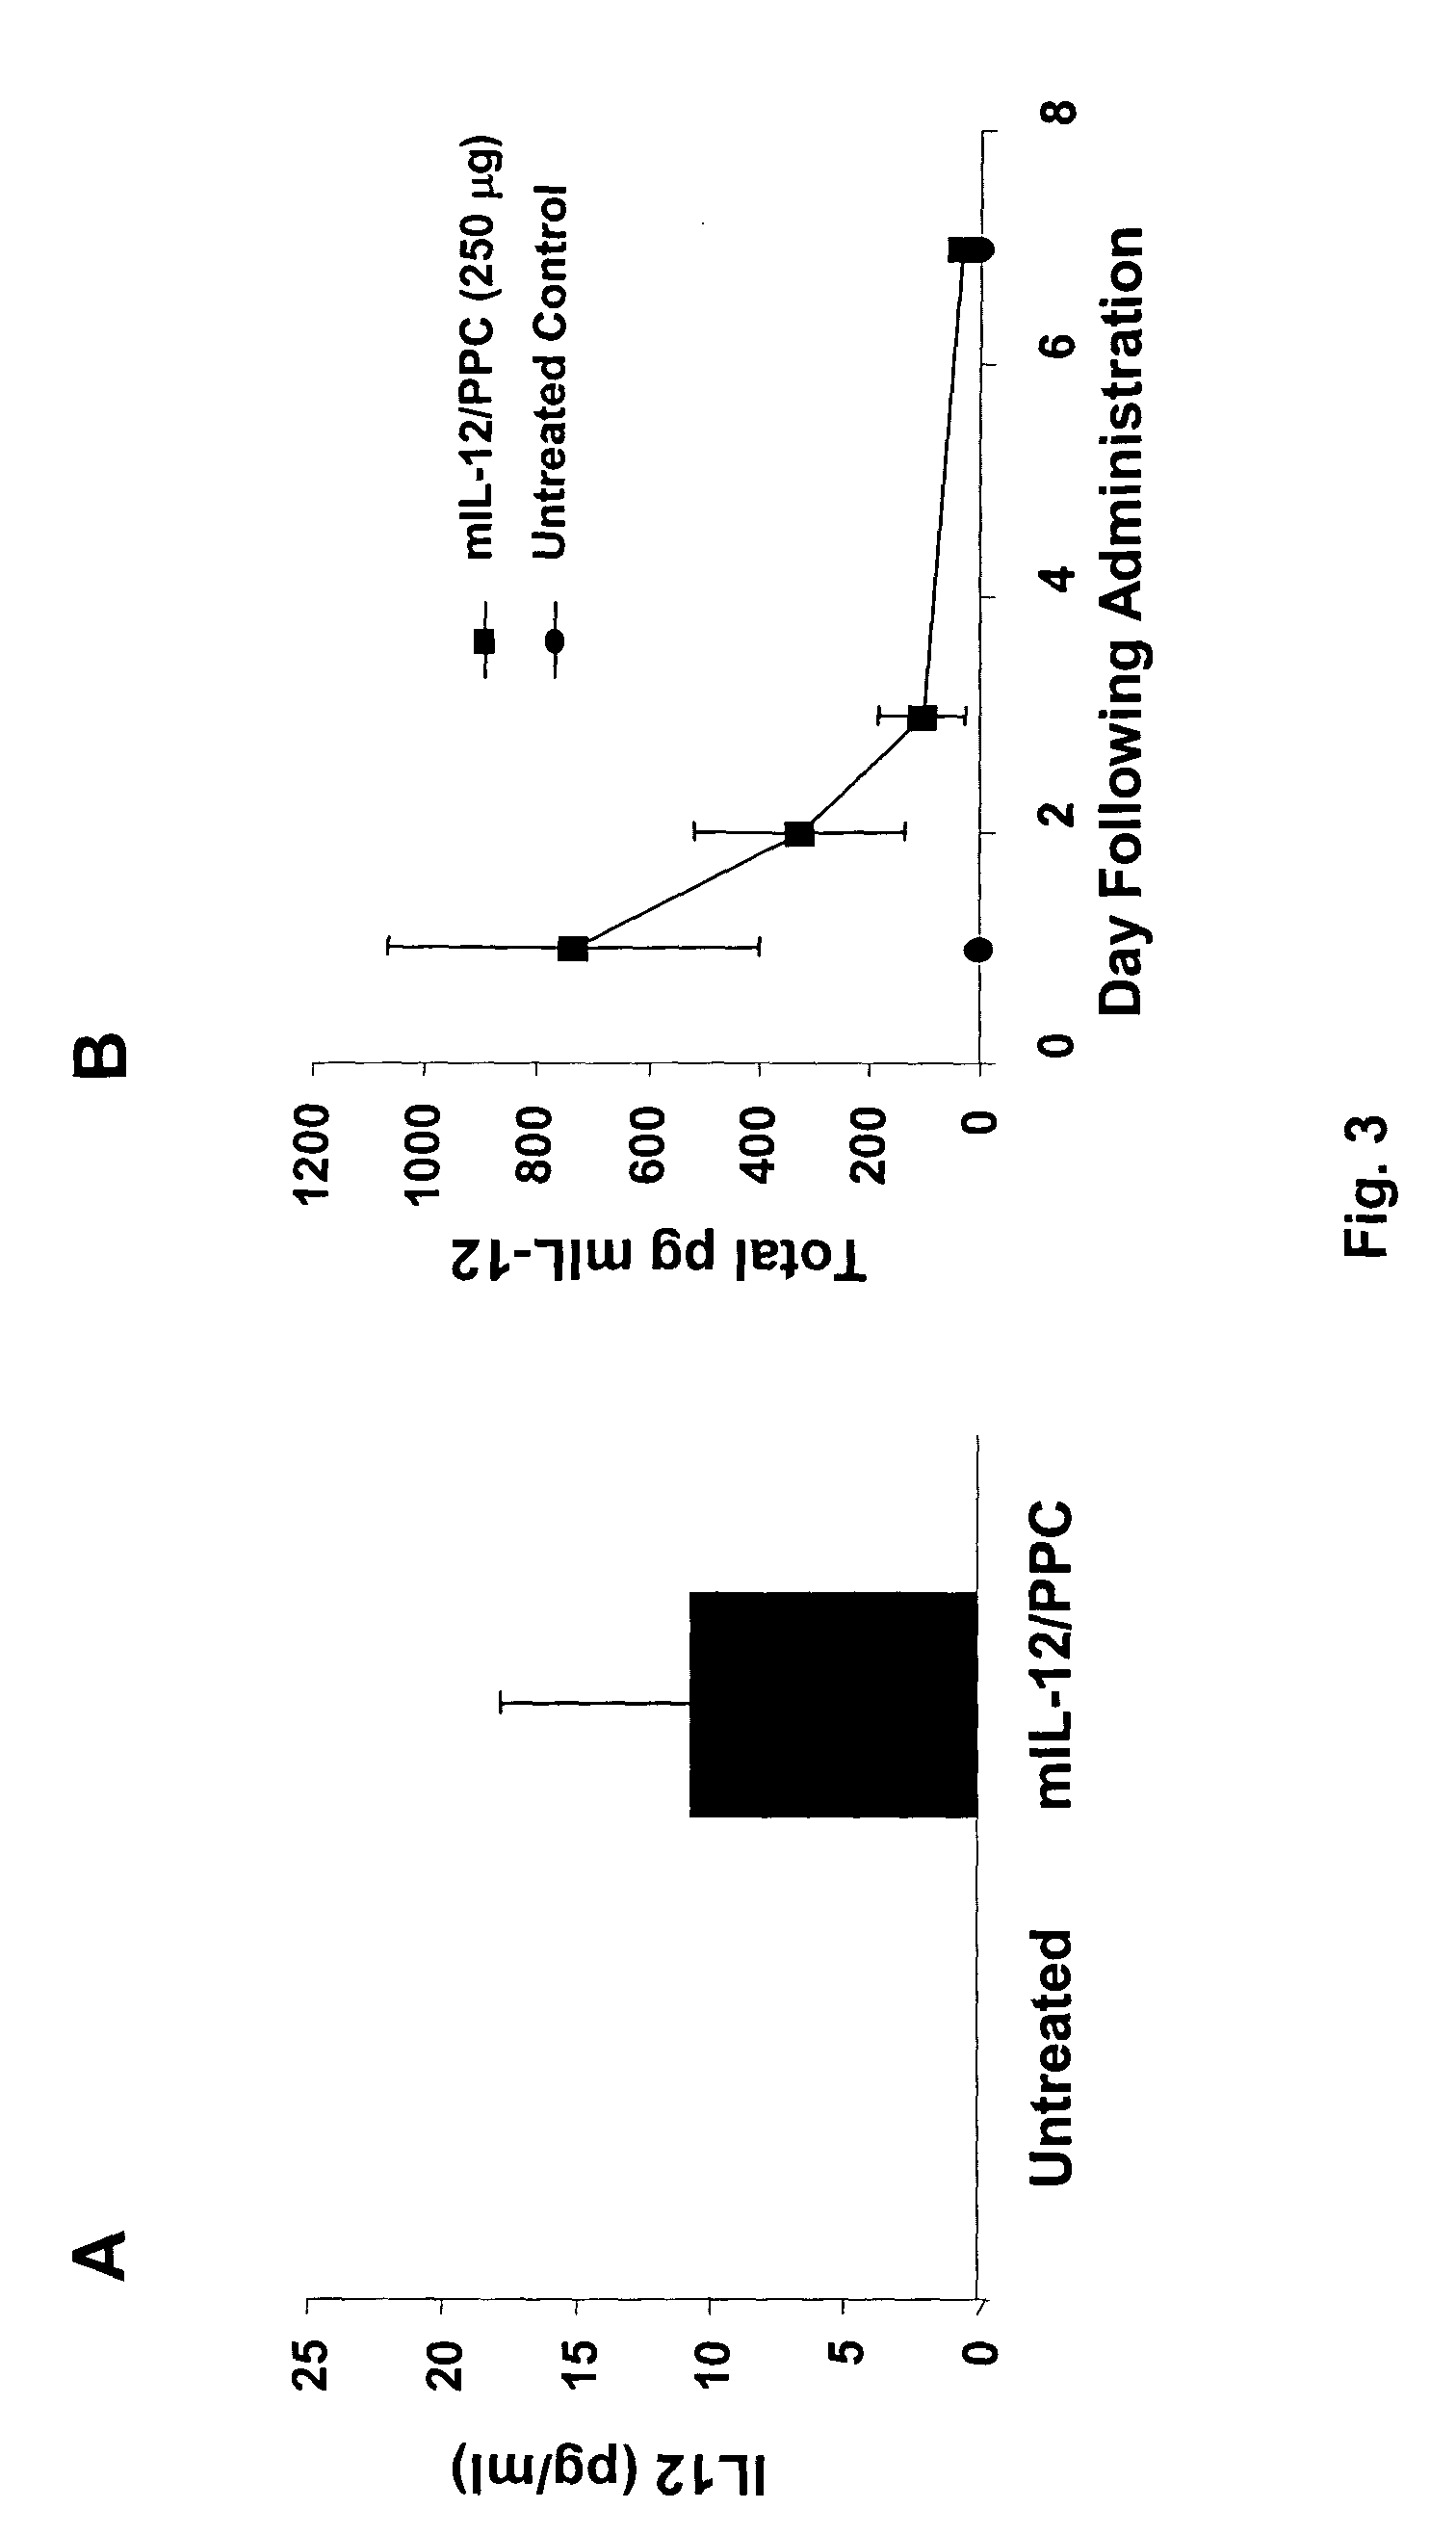 Combination of immuno gene therapy and chemotherapy for treatment of cancer and hyperproliferative diseases